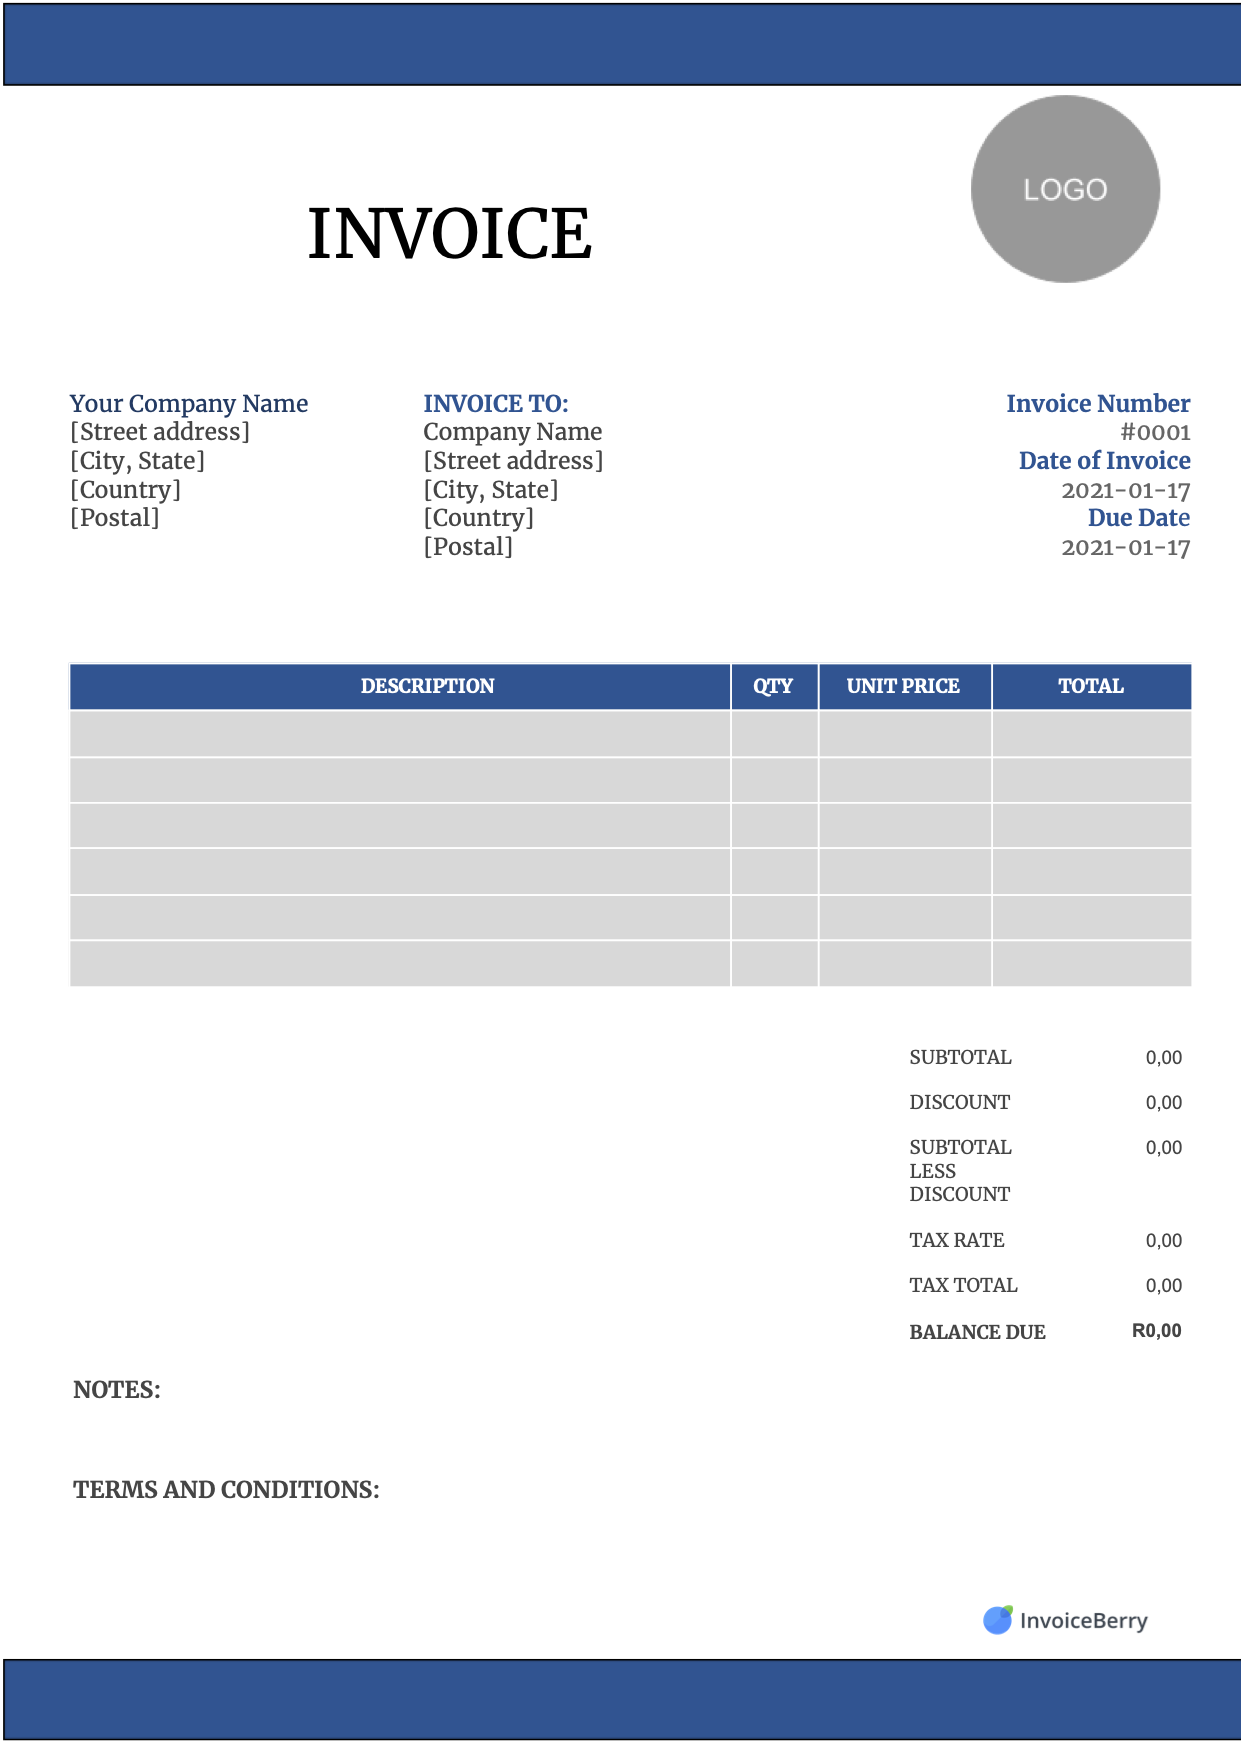 Free South Africa Invoice Template Sample 3 Download InvoiceBerry